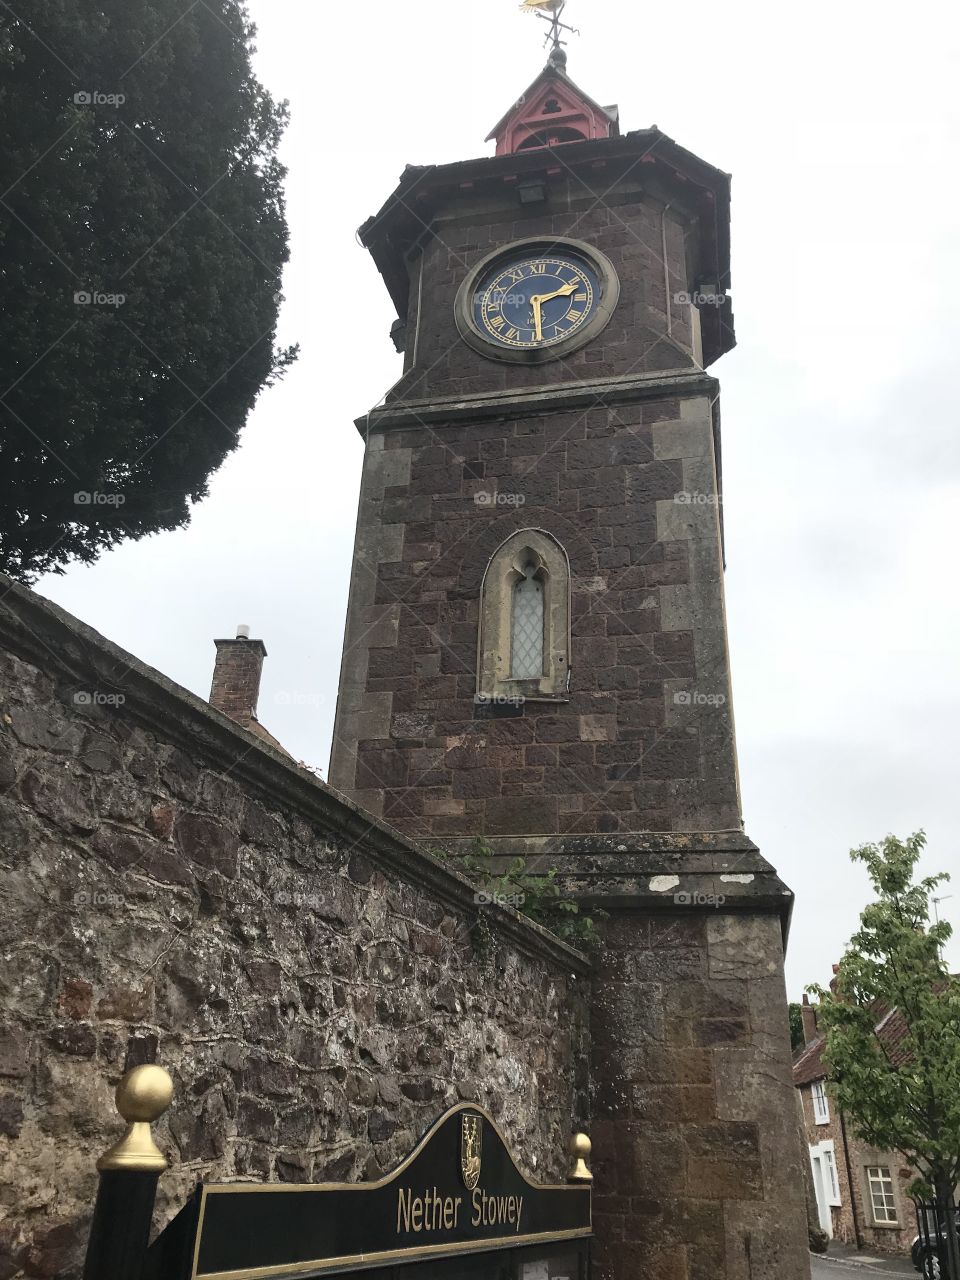 This clock is a central feature of the small village of Nether Stowey in Somerset and that gives it its gravitas.